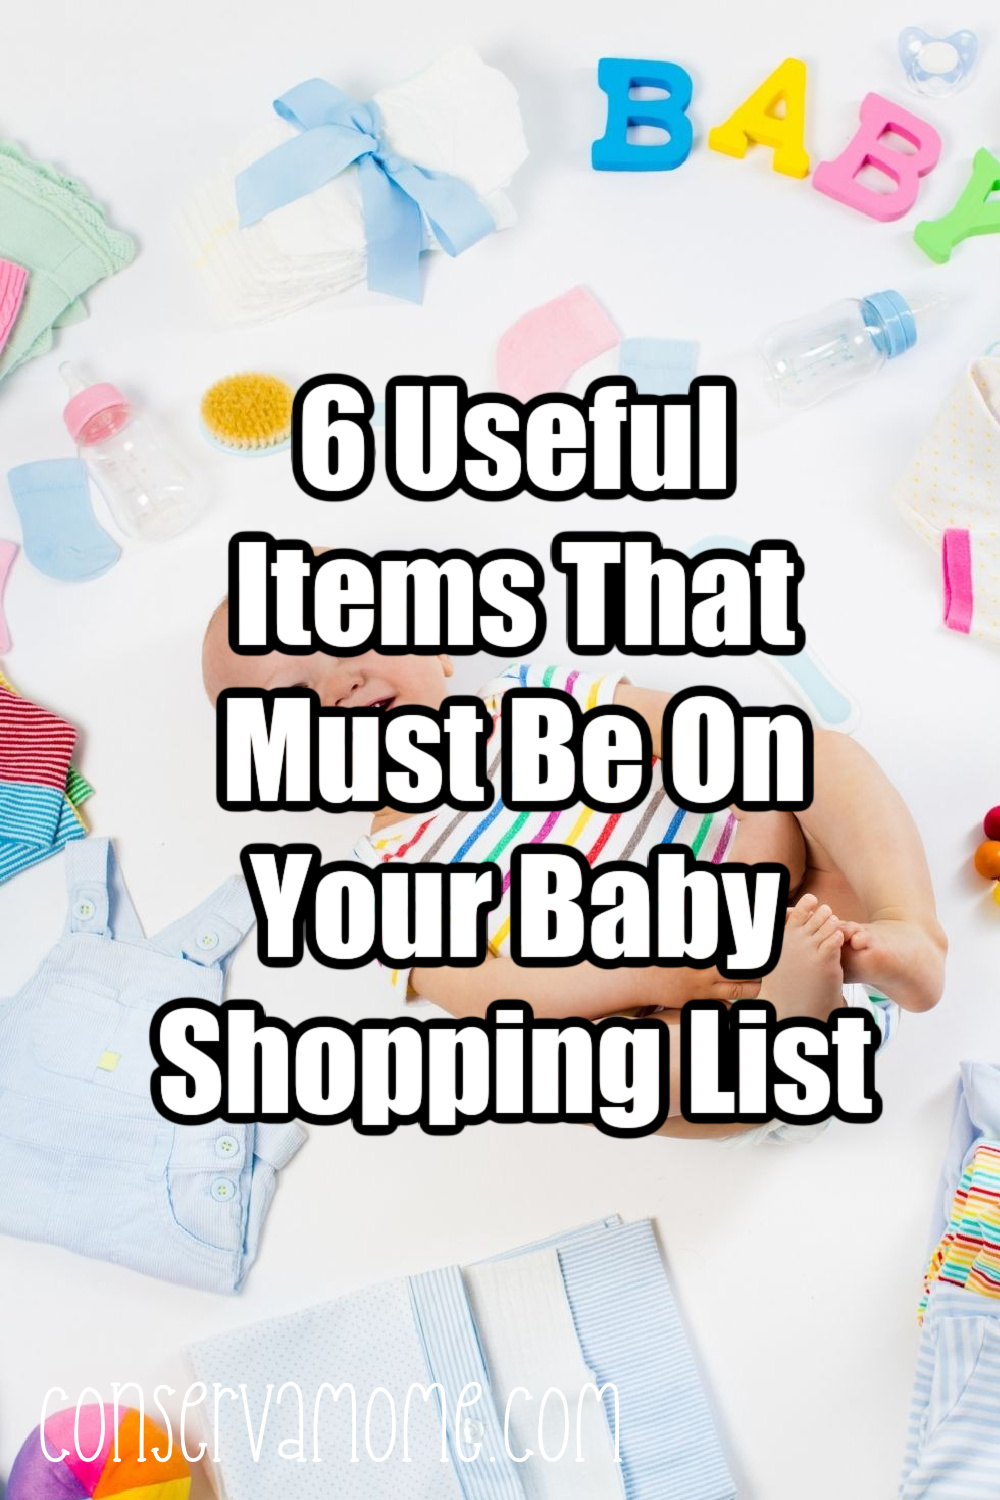 6 Useful Items That Must Be On Your Baby Shopping List 